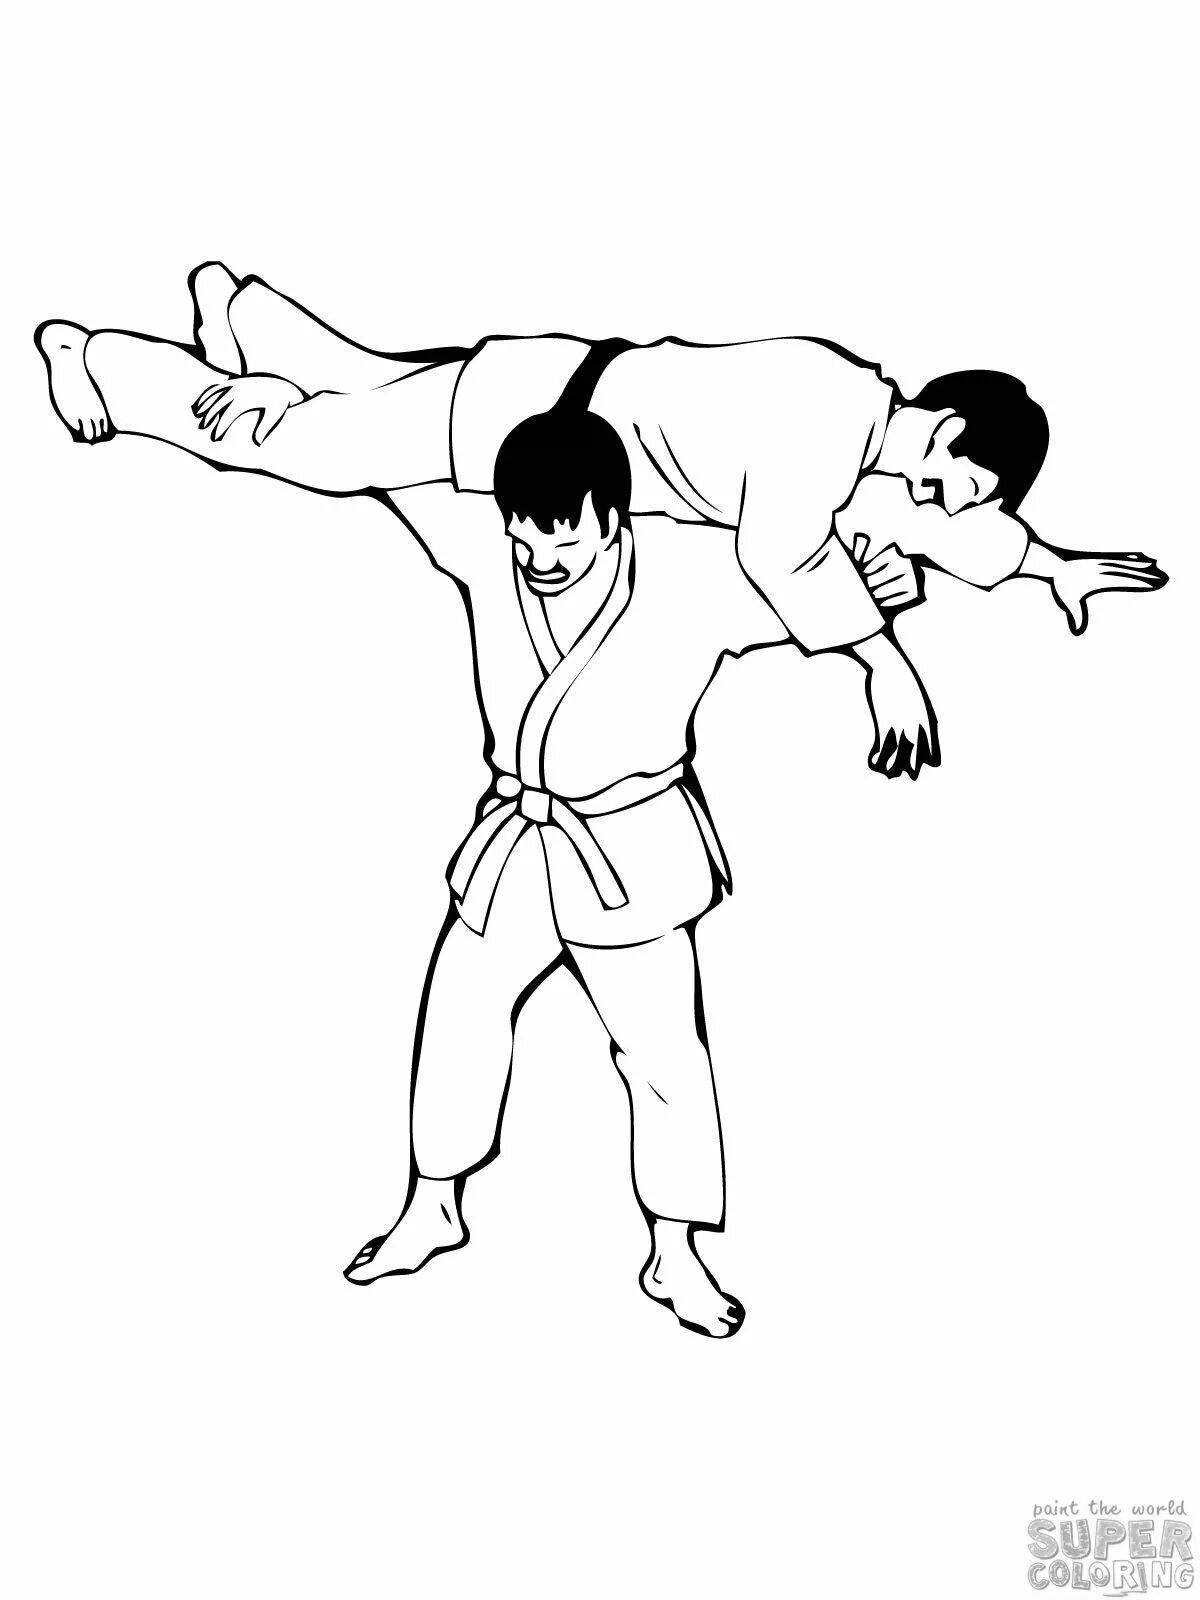 Colorful judo coloring pages for kids